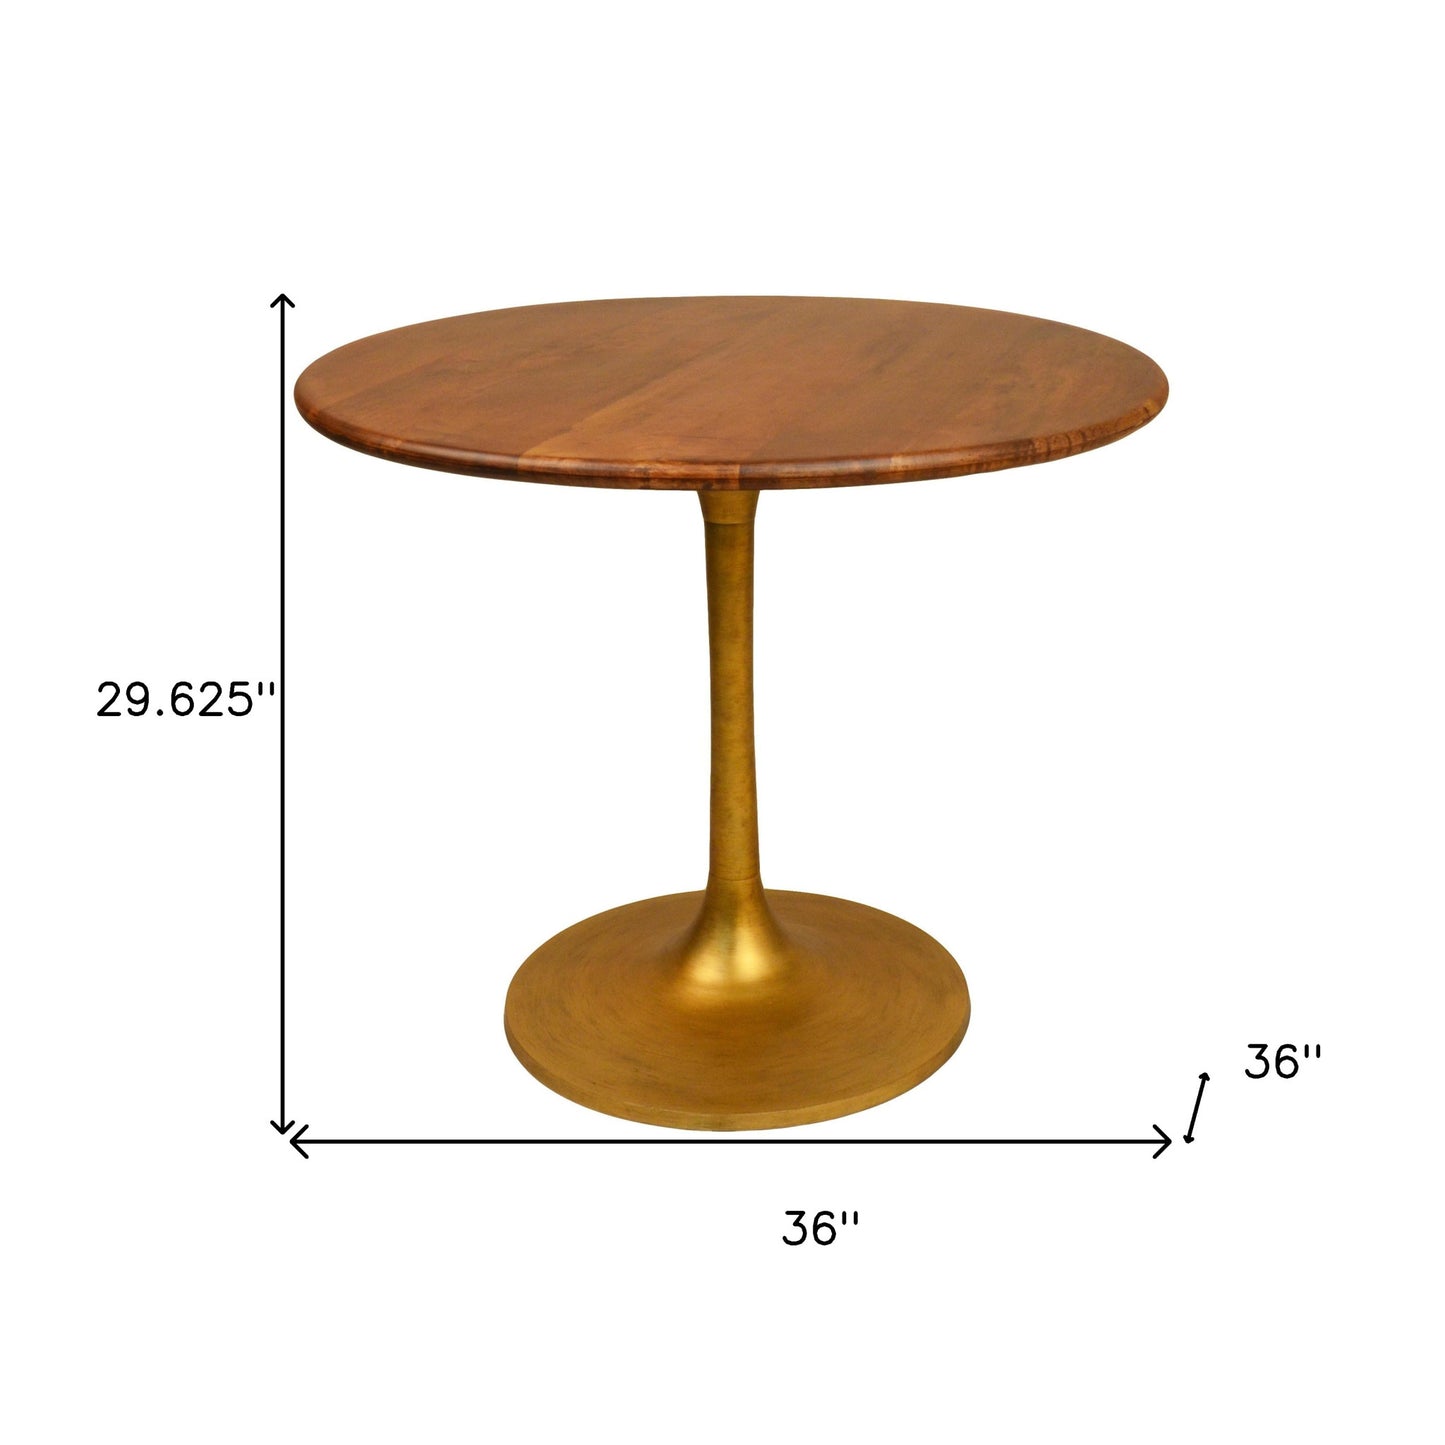 36" Brown and Gold Rounded Solid Wood and Iron Pedestal Base Dining Table